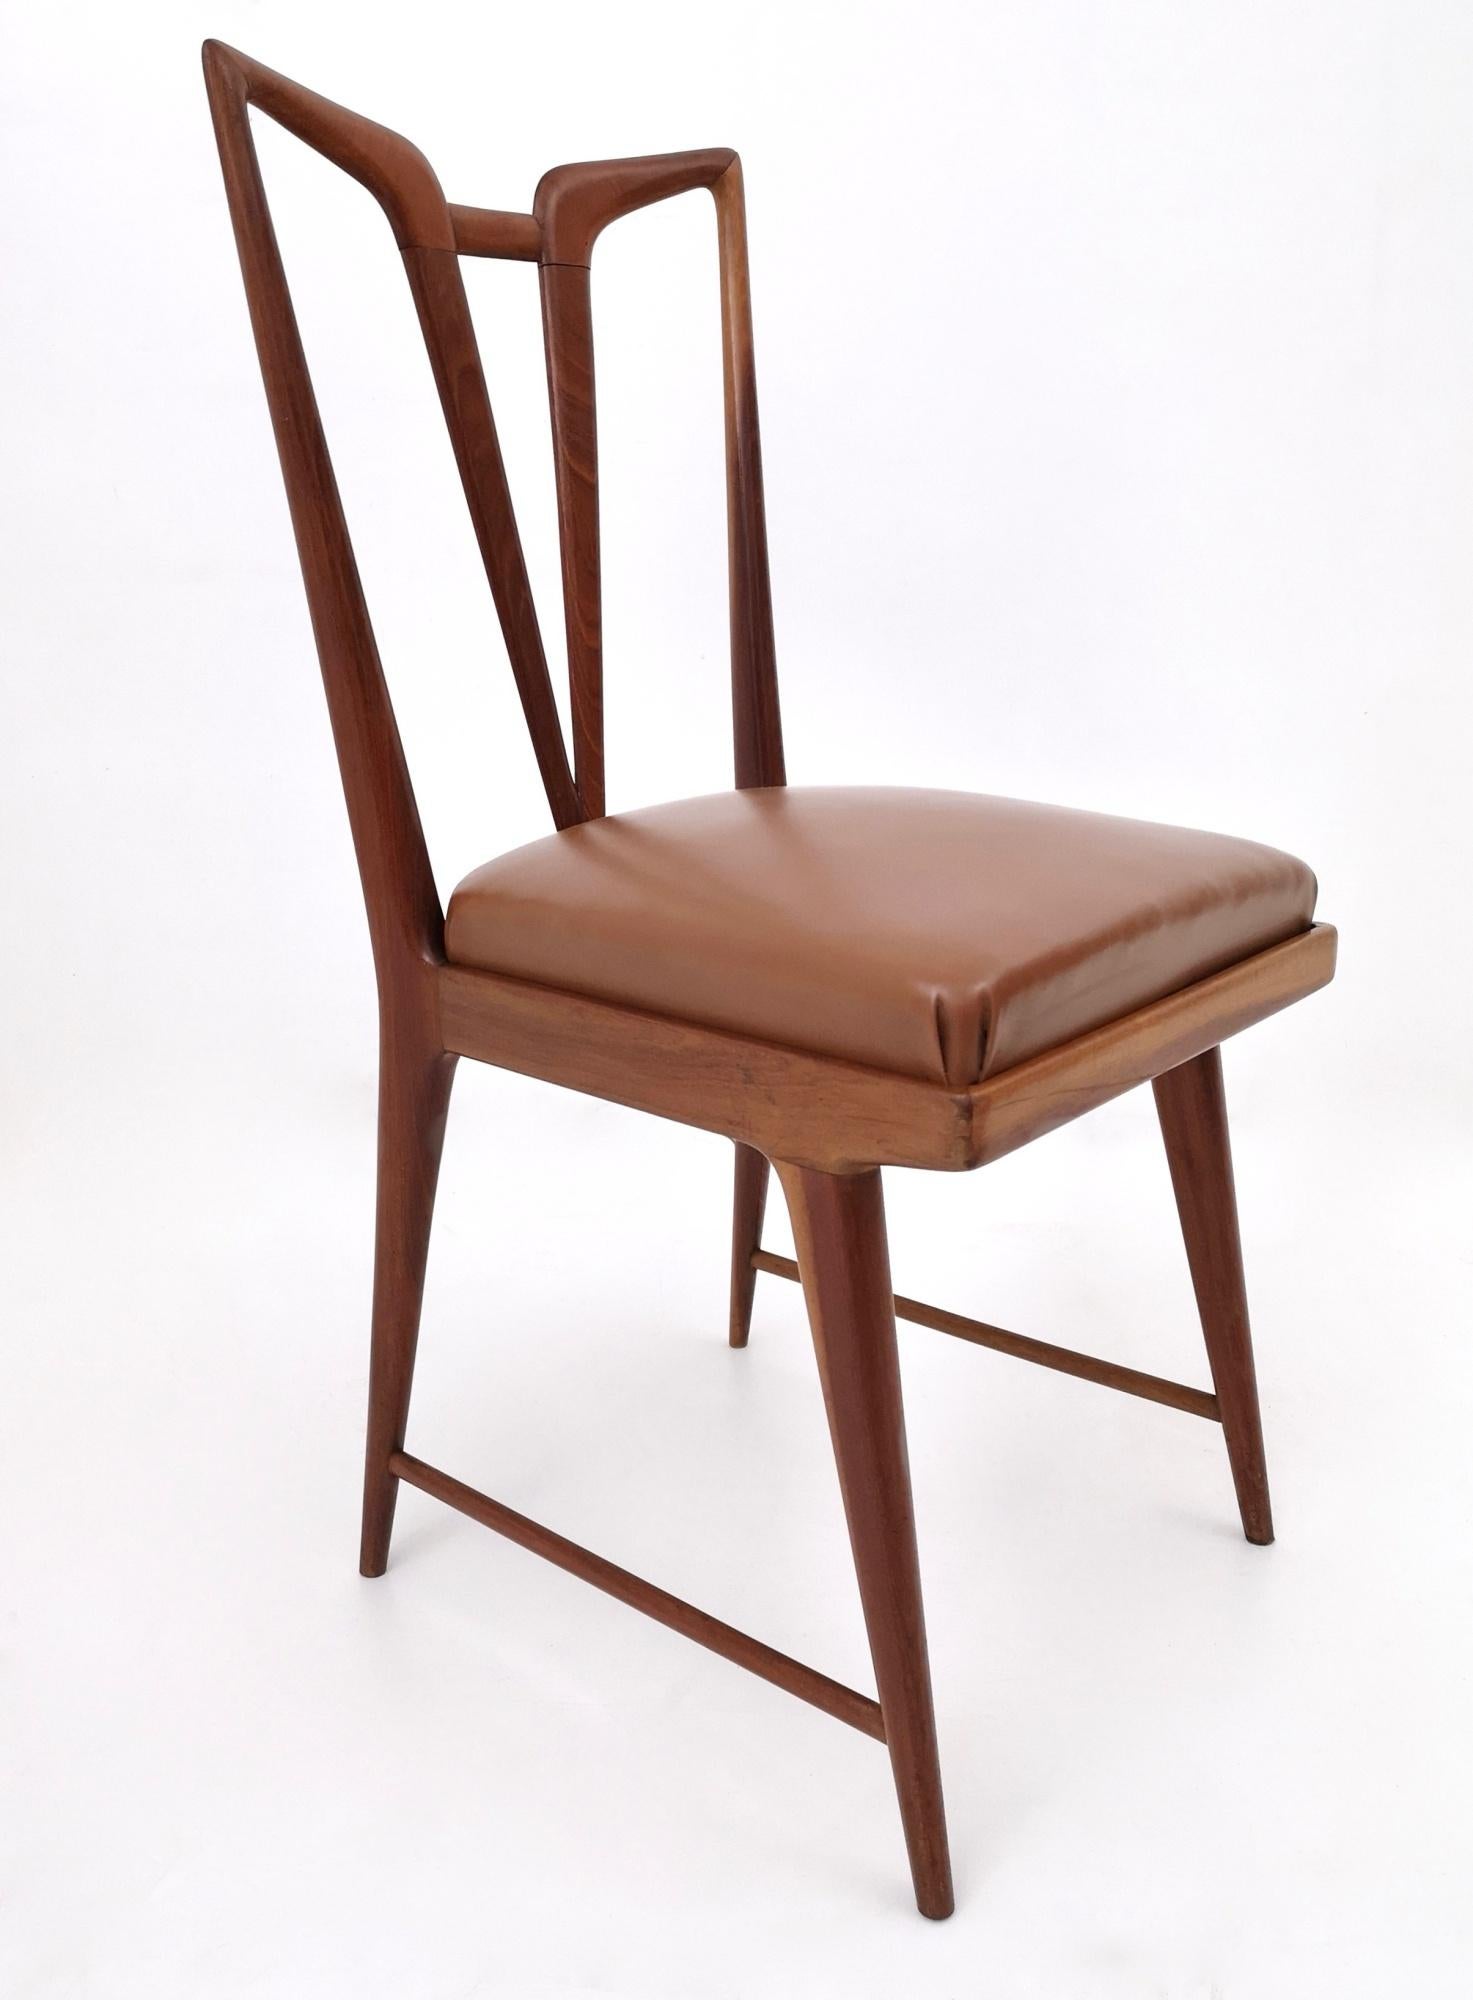 Mid-20th Century Set of Six Vintage Solid Wood Dining Chairs with Brown Skai Upholstery, Italy